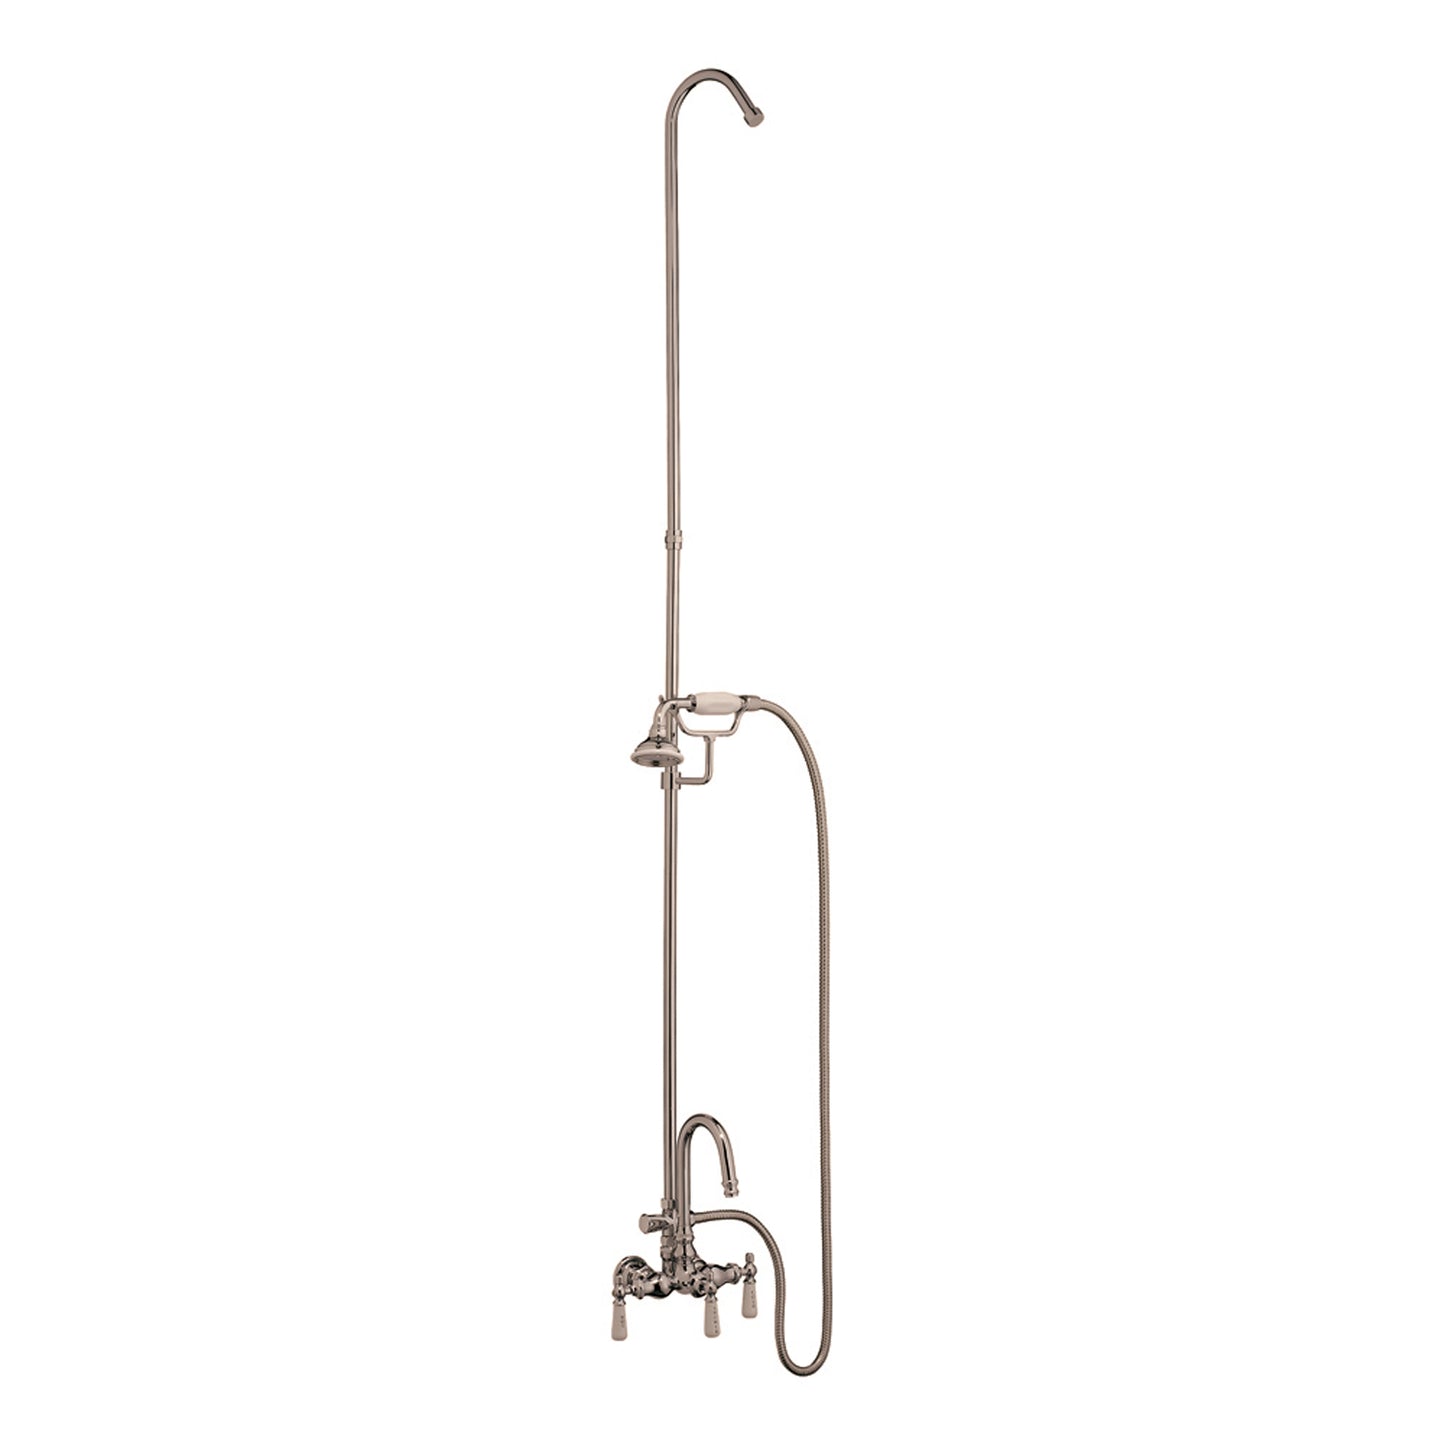 Clawfoot Tub Gooseneck Faucet Kit with Lever Handles, Hand Shower, & Riser Polished Nickel